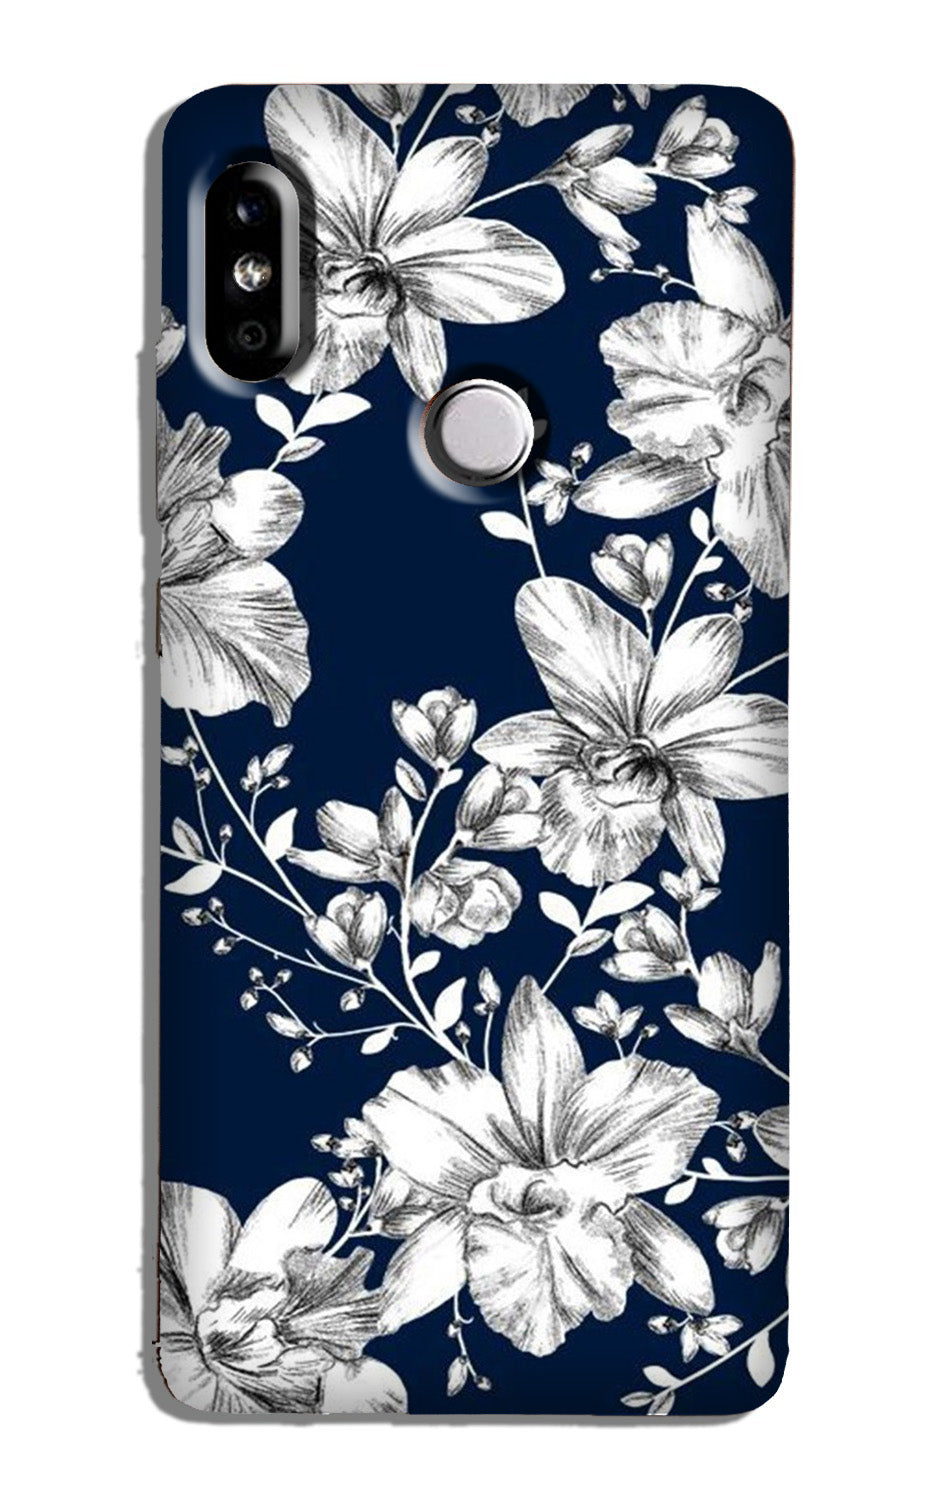 White flowers Blue Background Case for Redmi 6 Pro